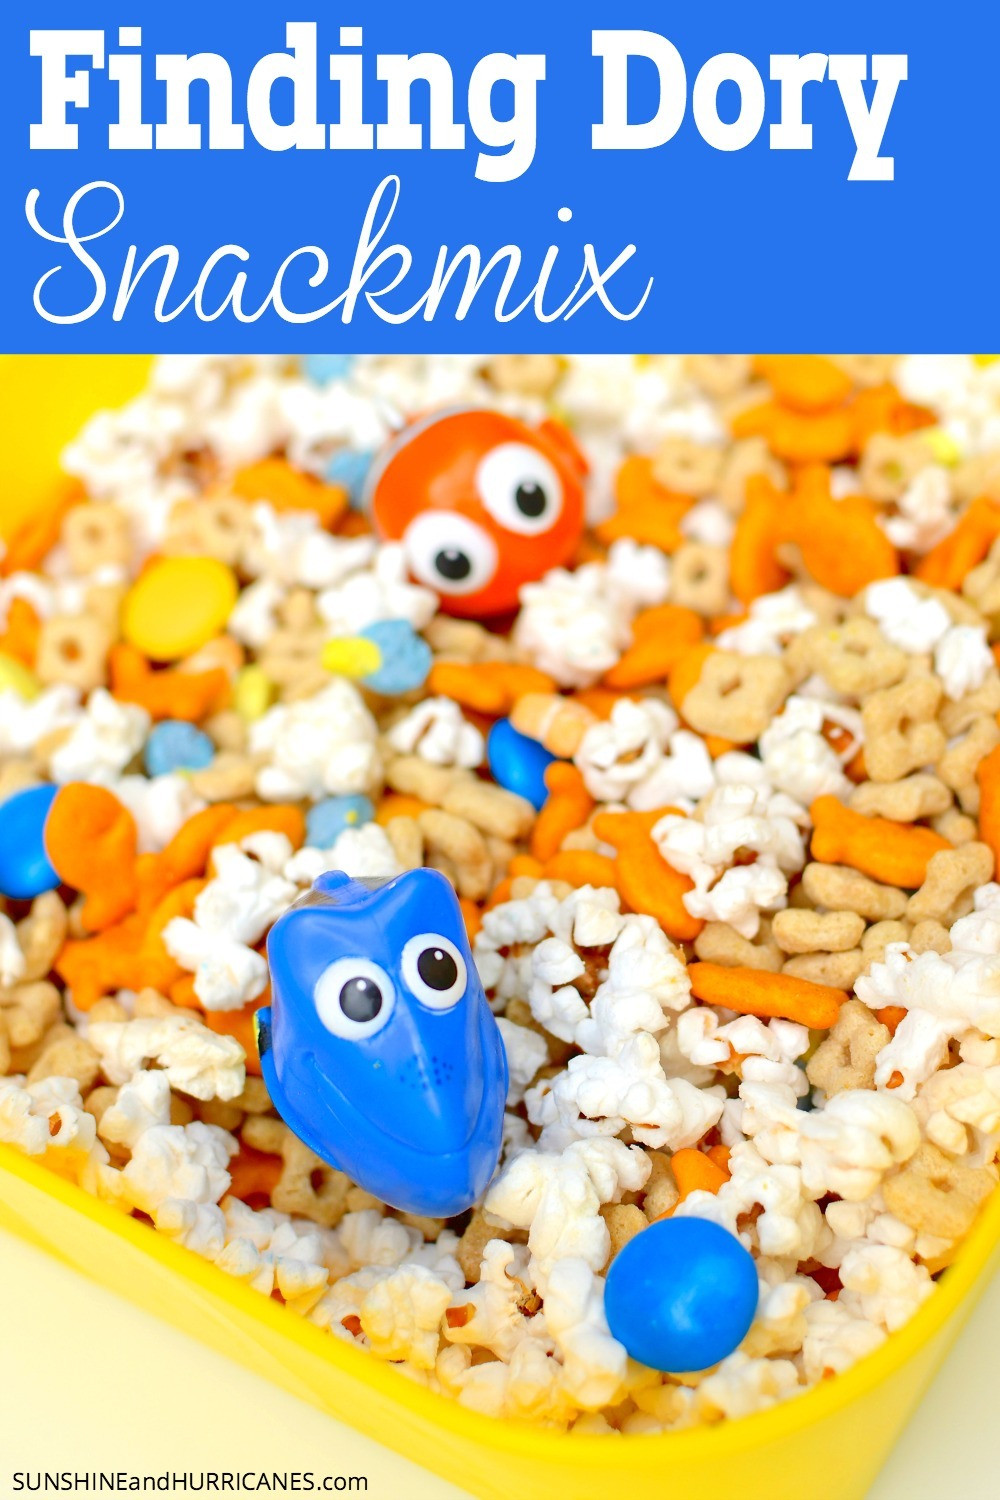 Finding Dory Party Food Ideas
 Finding Dory Snacks